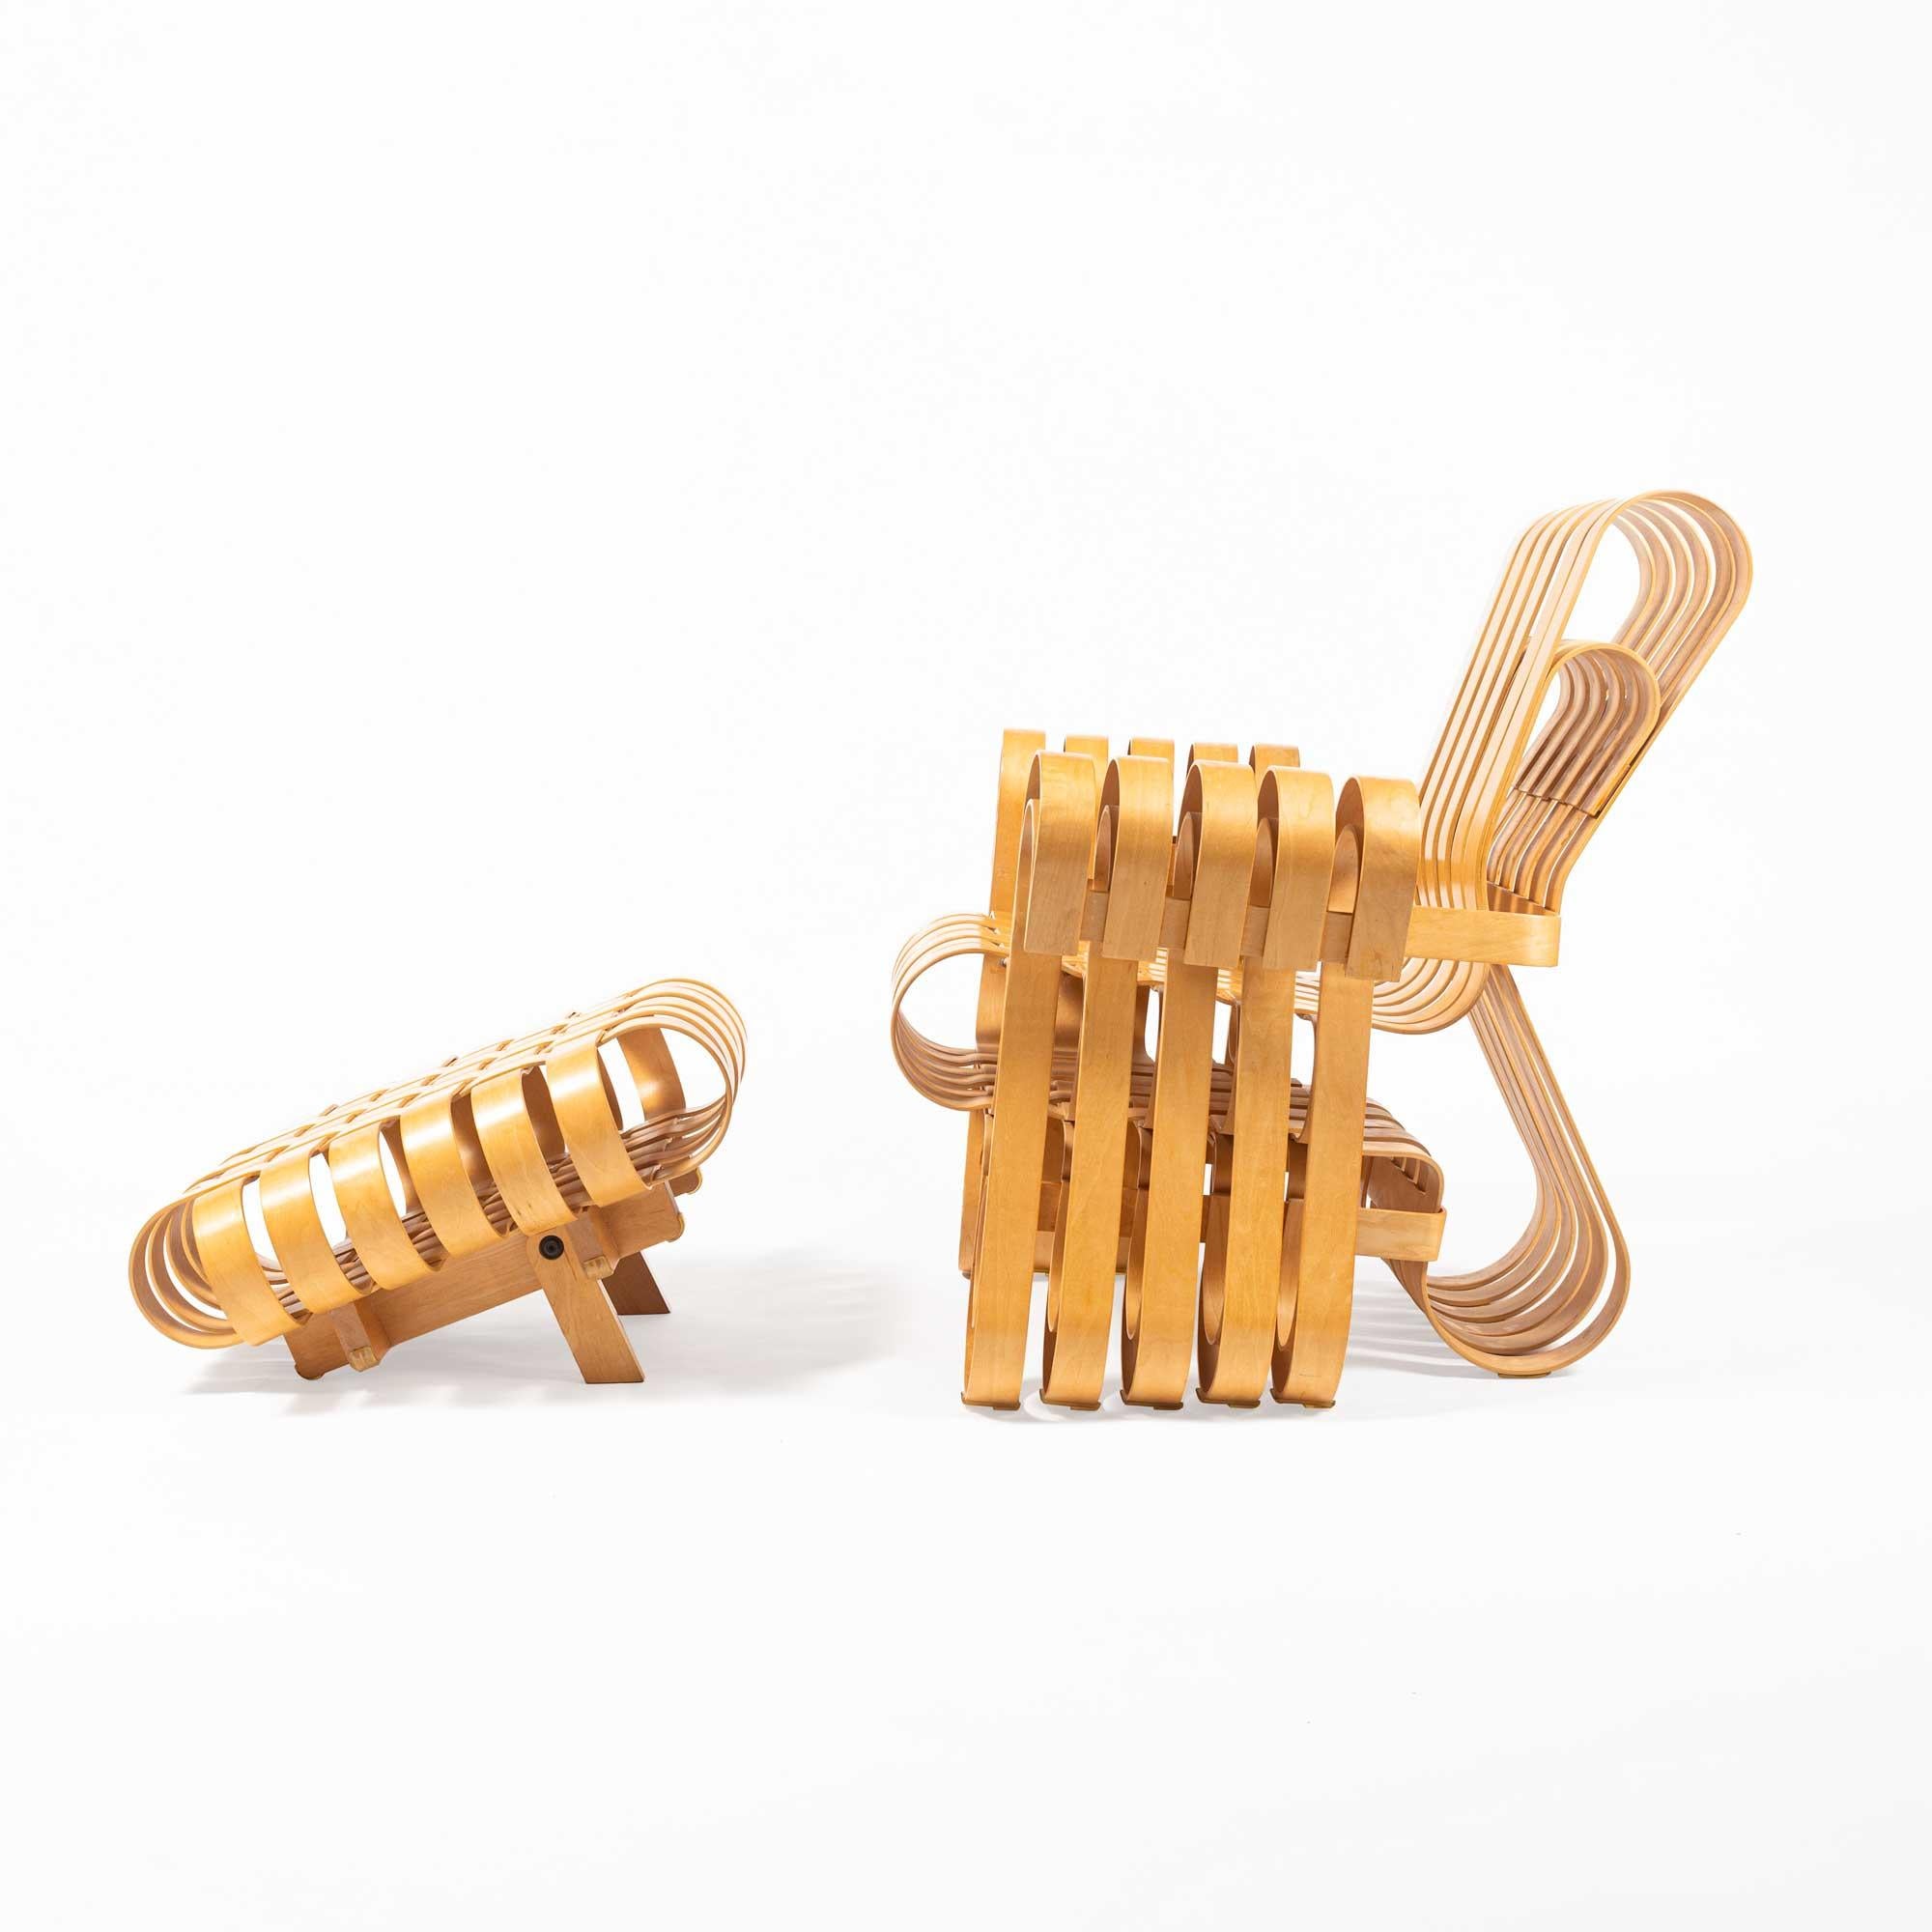 Inspired by the surprising strength of the apple crates he played on as a child, Frank Gehry created his thoroughly original collection of bentwood furniture. The ribbon-like designs transcend the conventions of style by exploring, as the great